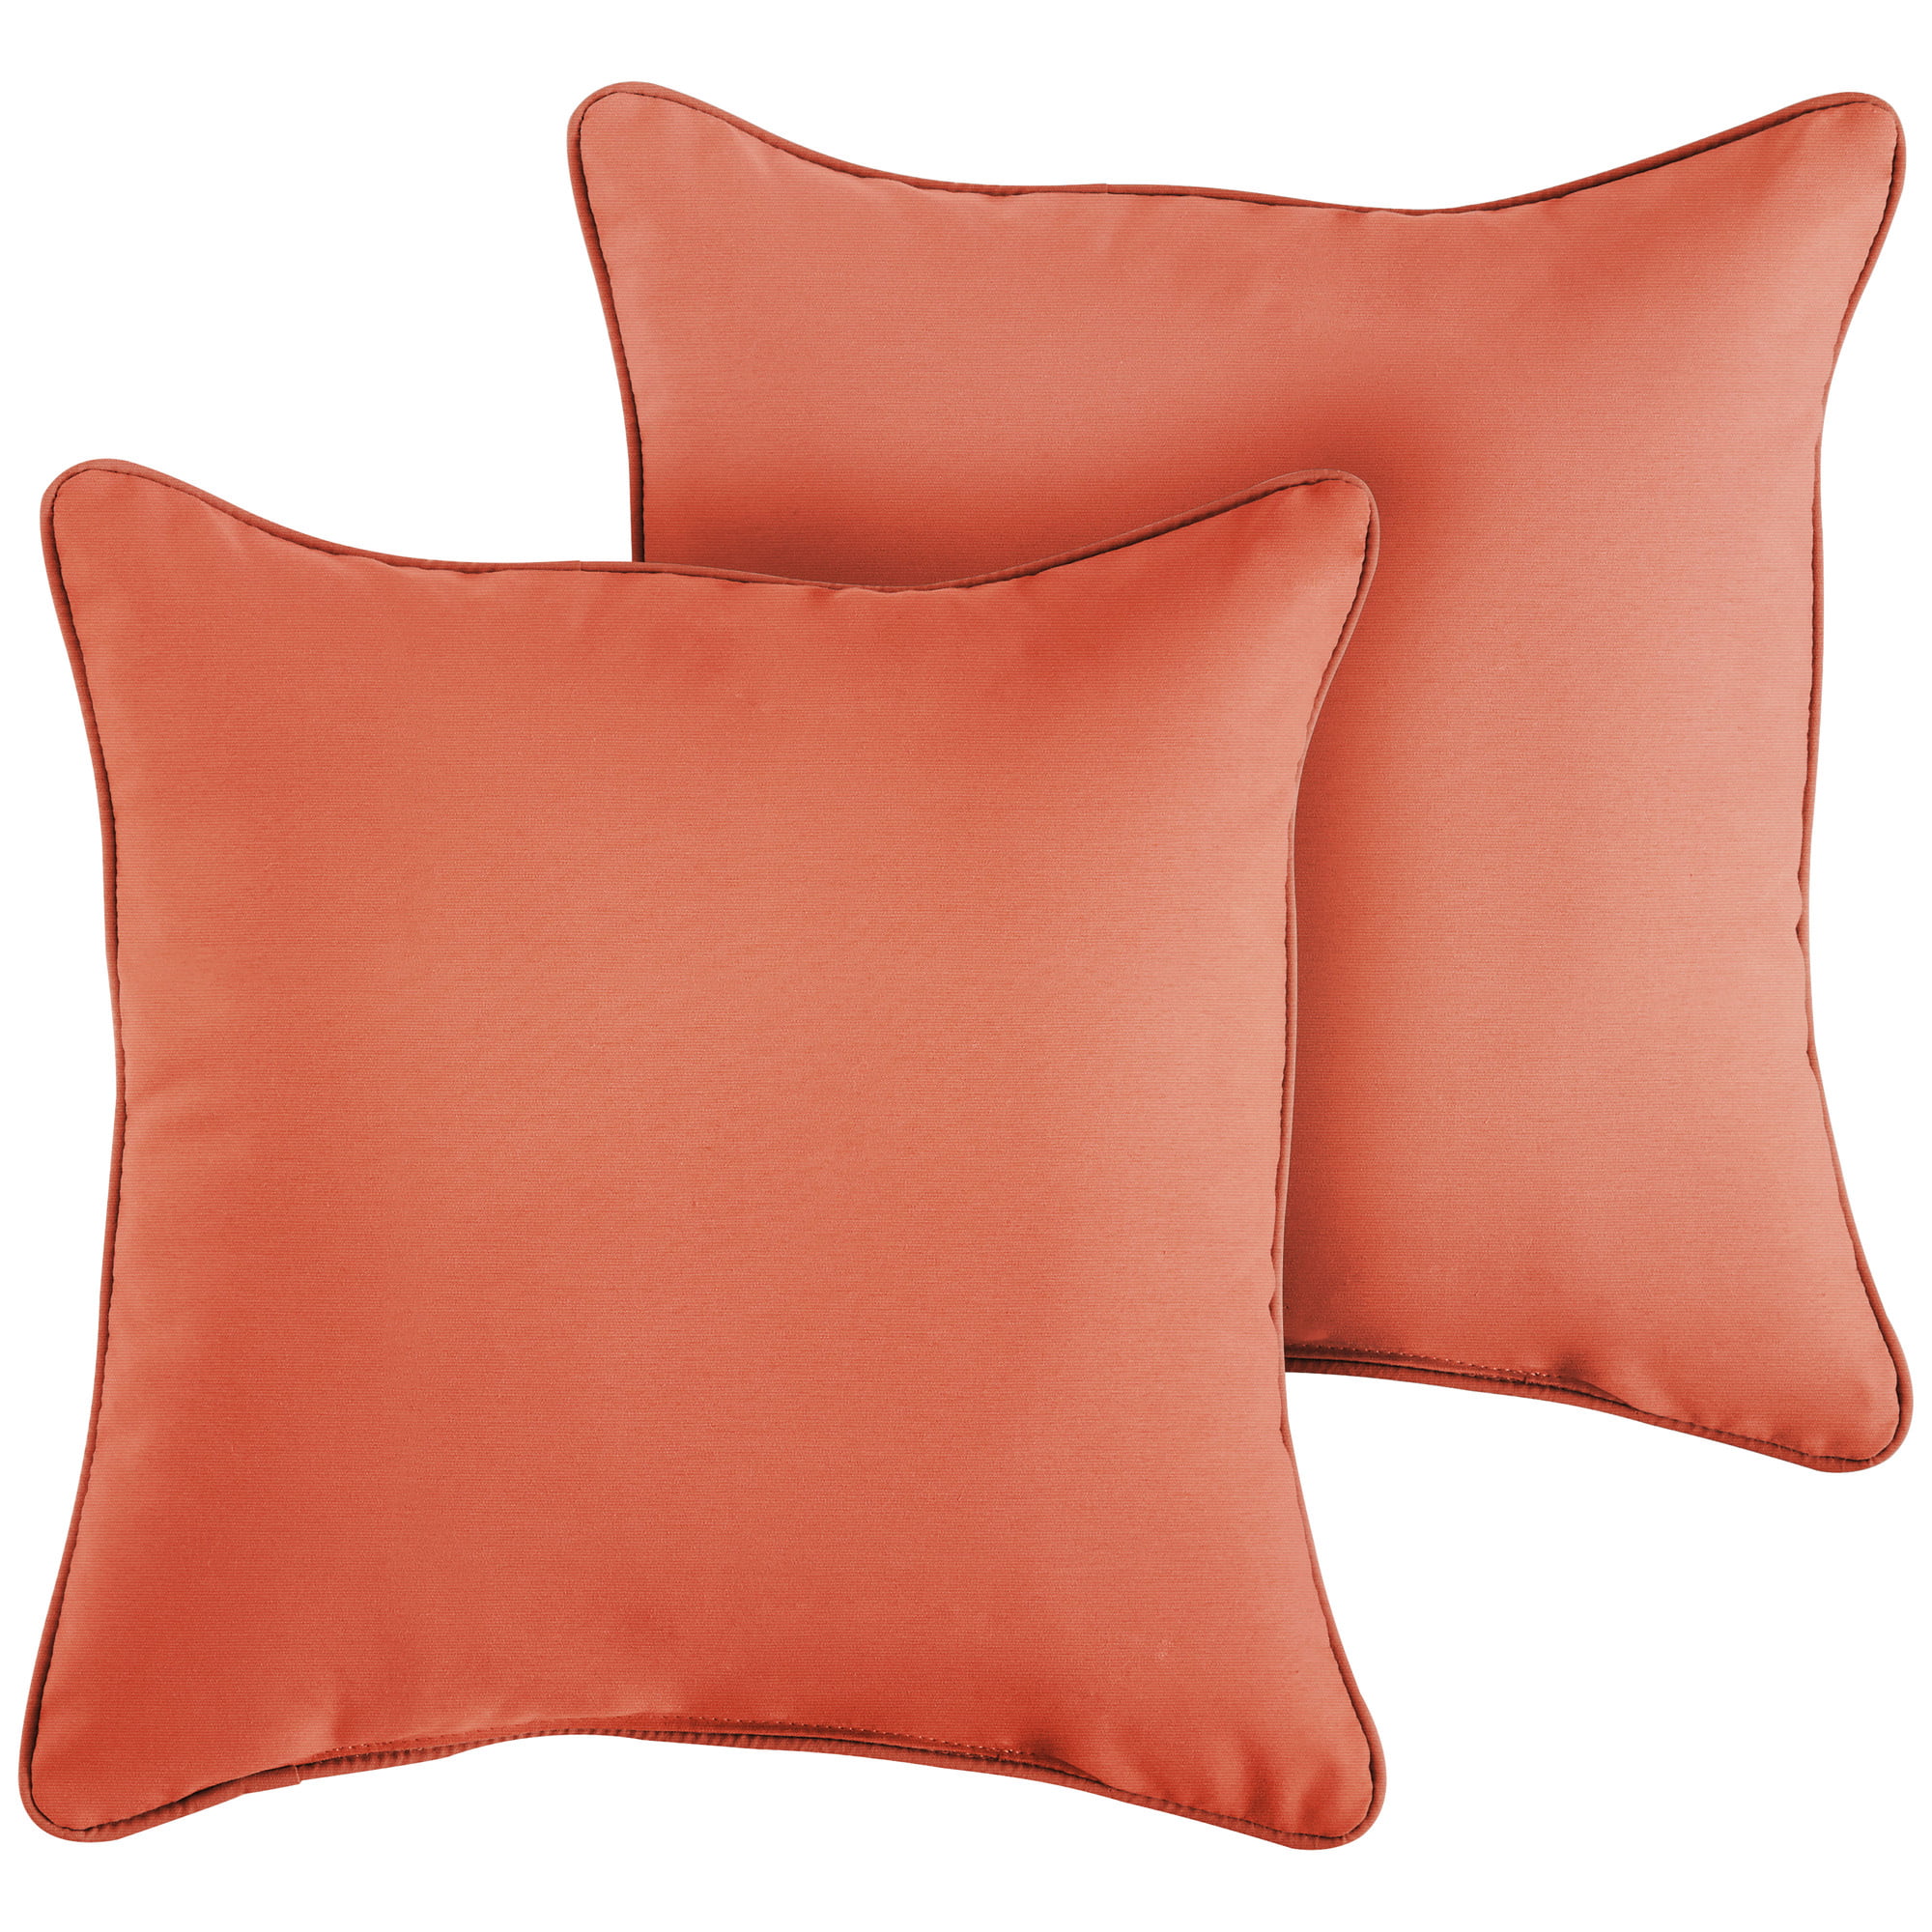 Throw Pillow Sunbrella Fabric w/ UV-Protection and Fade Resistant Orange 2-Pack